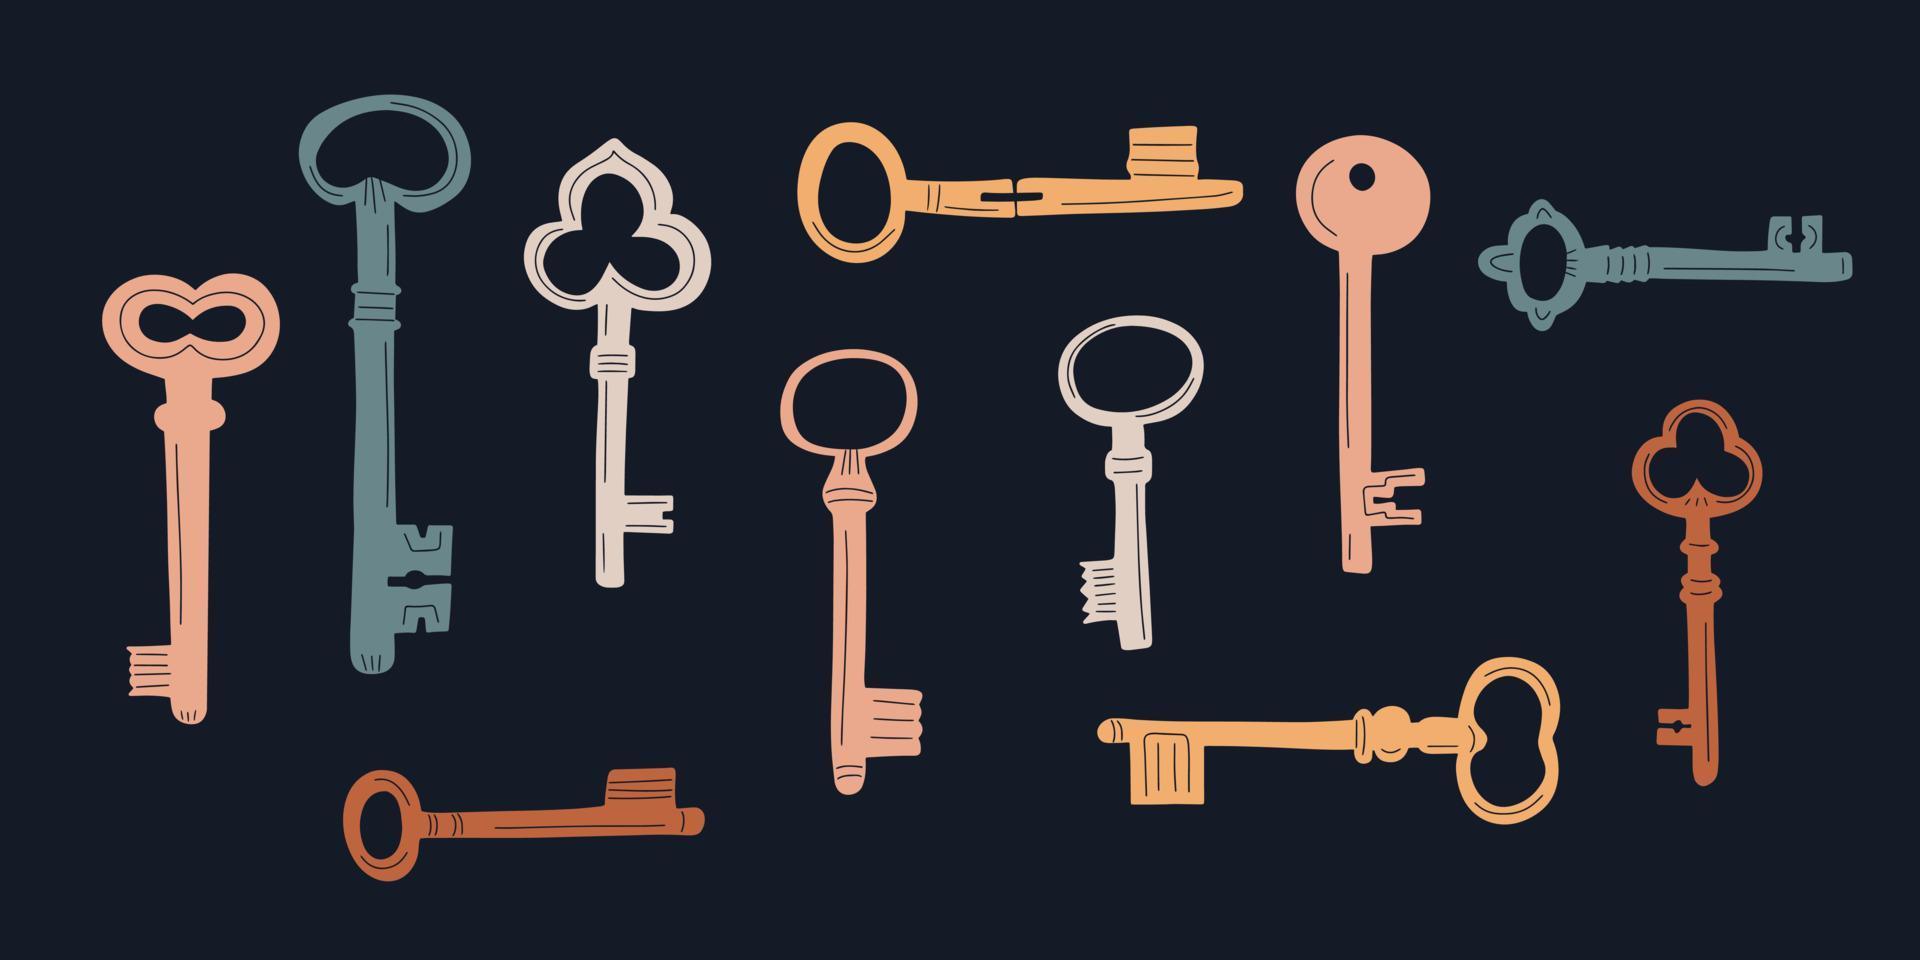 Hand-drawn old key doodle icon set. Vector Illustration in cartoon style on dark background